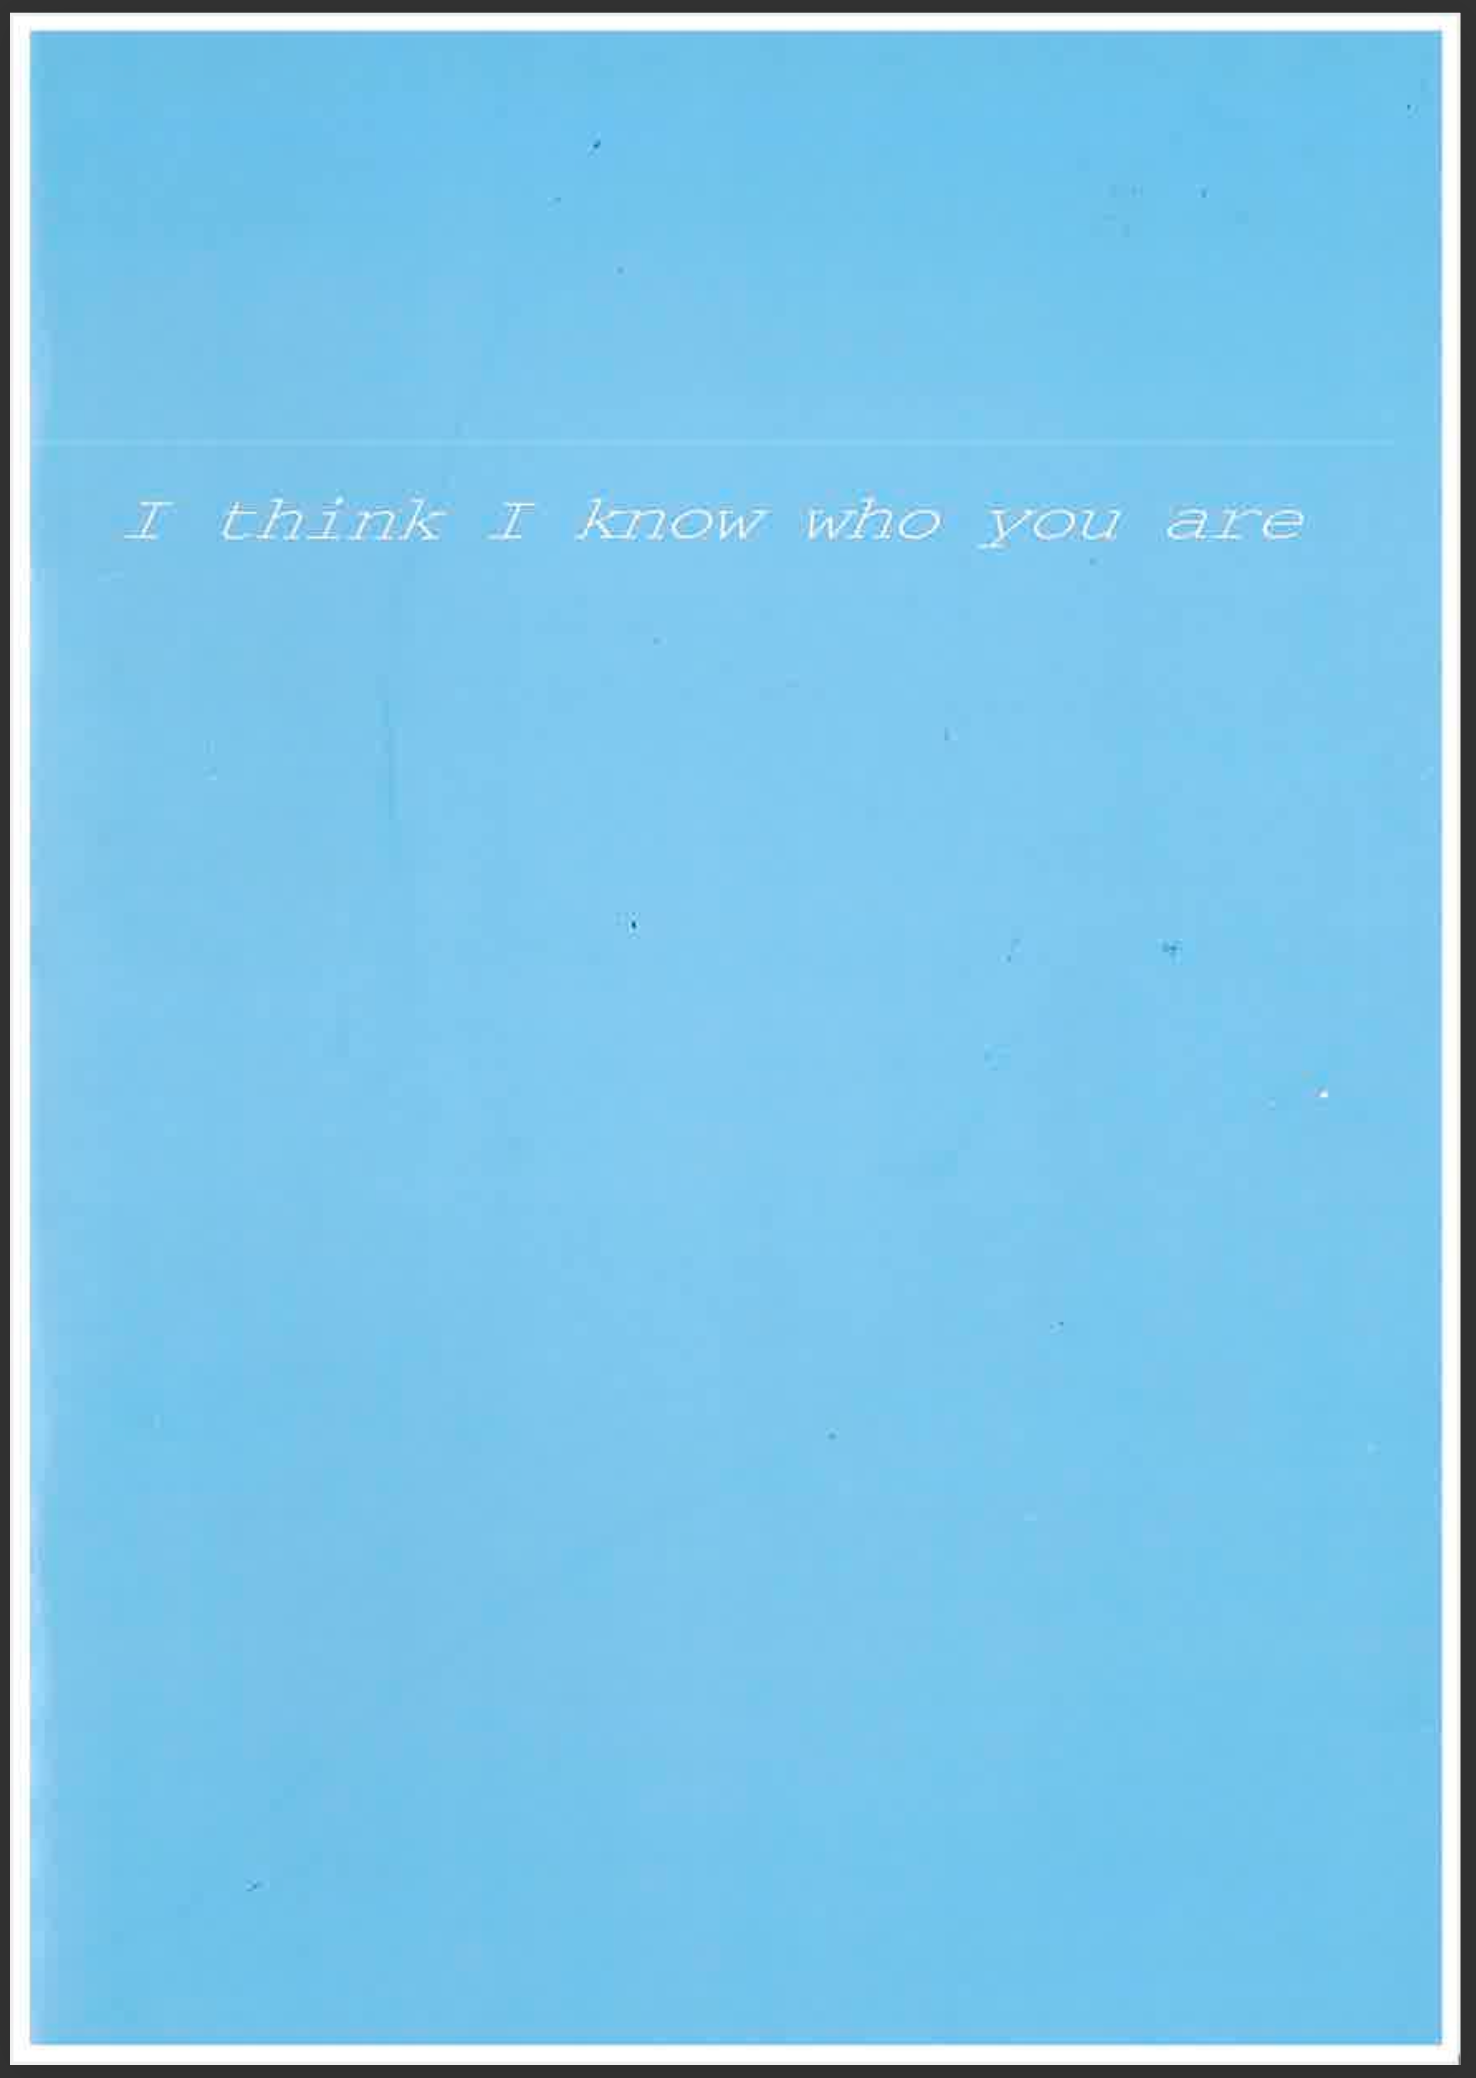 Light blue book cover with thin white text